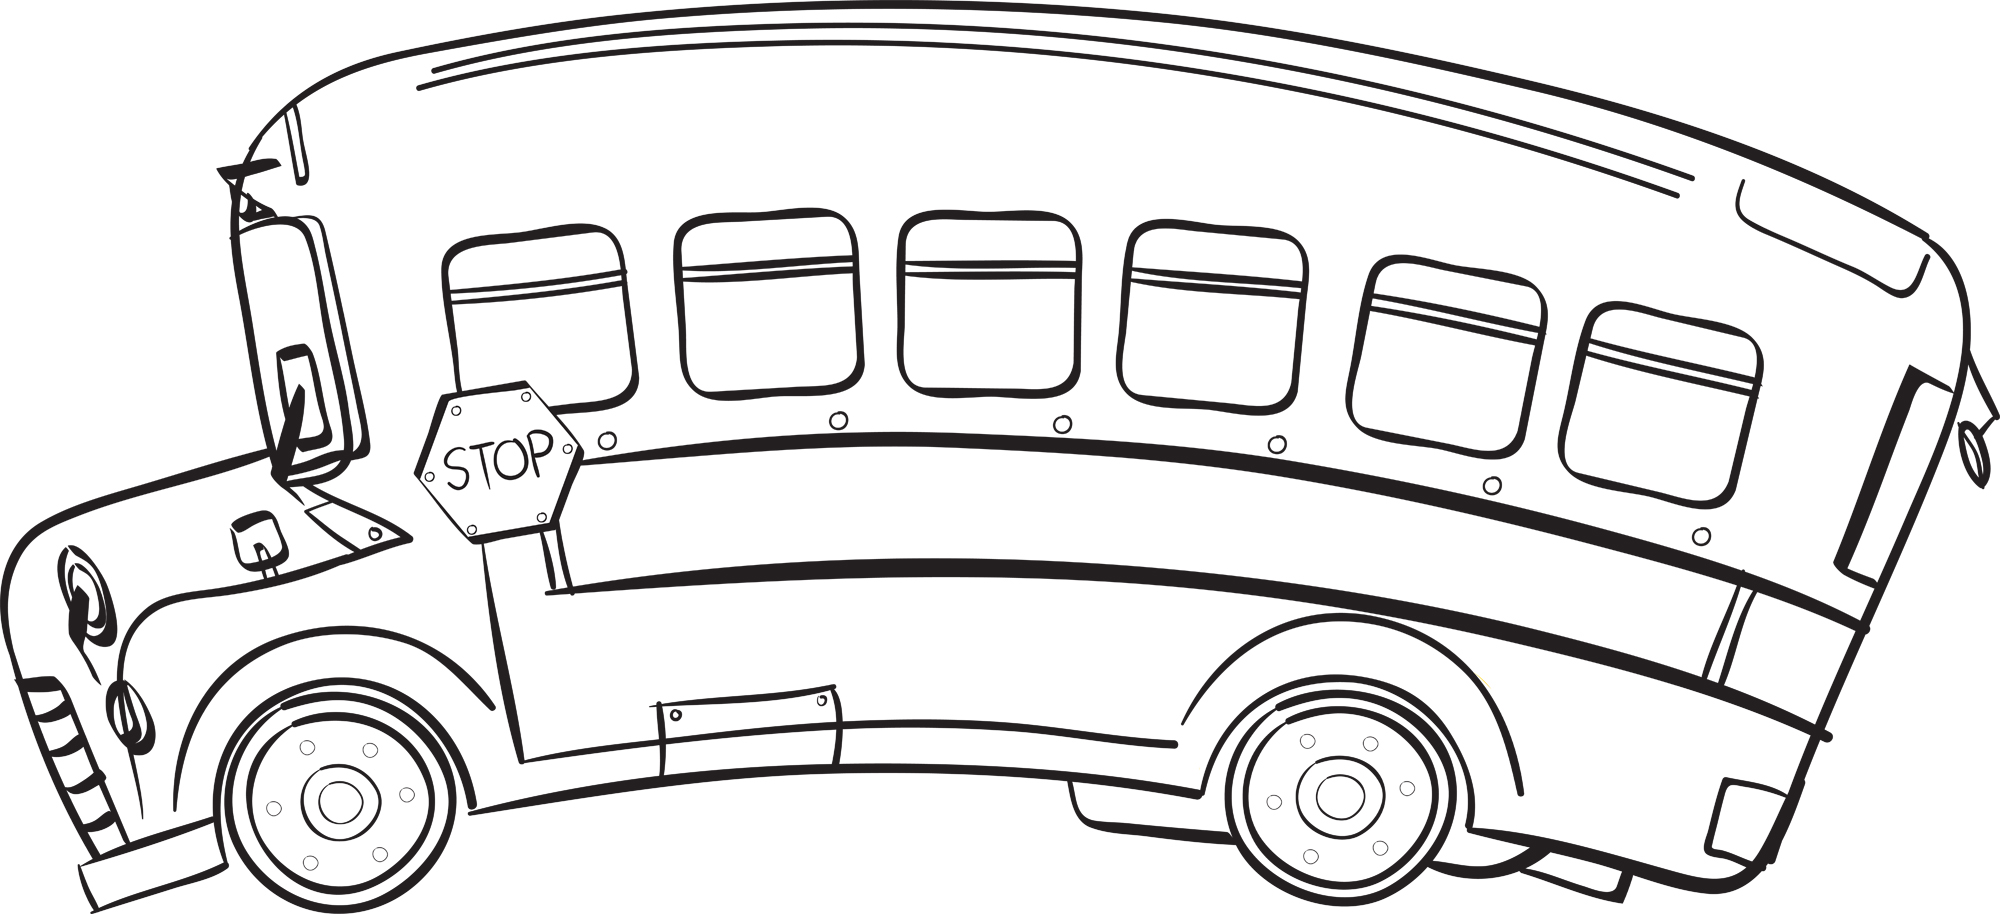 bus clipart library